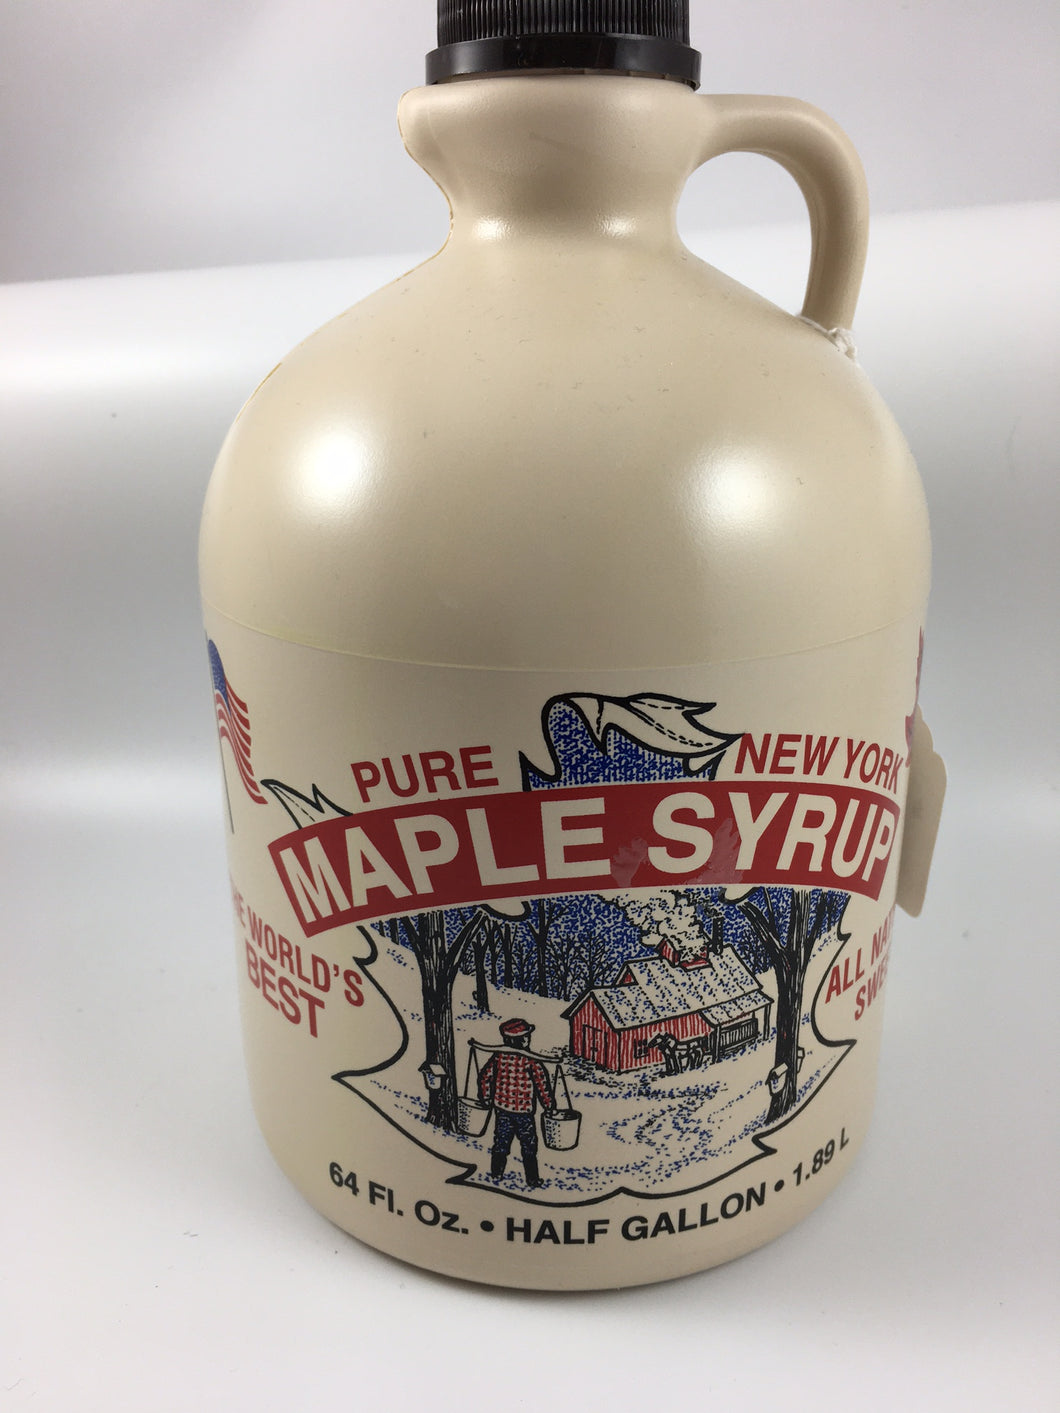 one 1/2 gallon of pure Maple Syrup by Ridge Maple